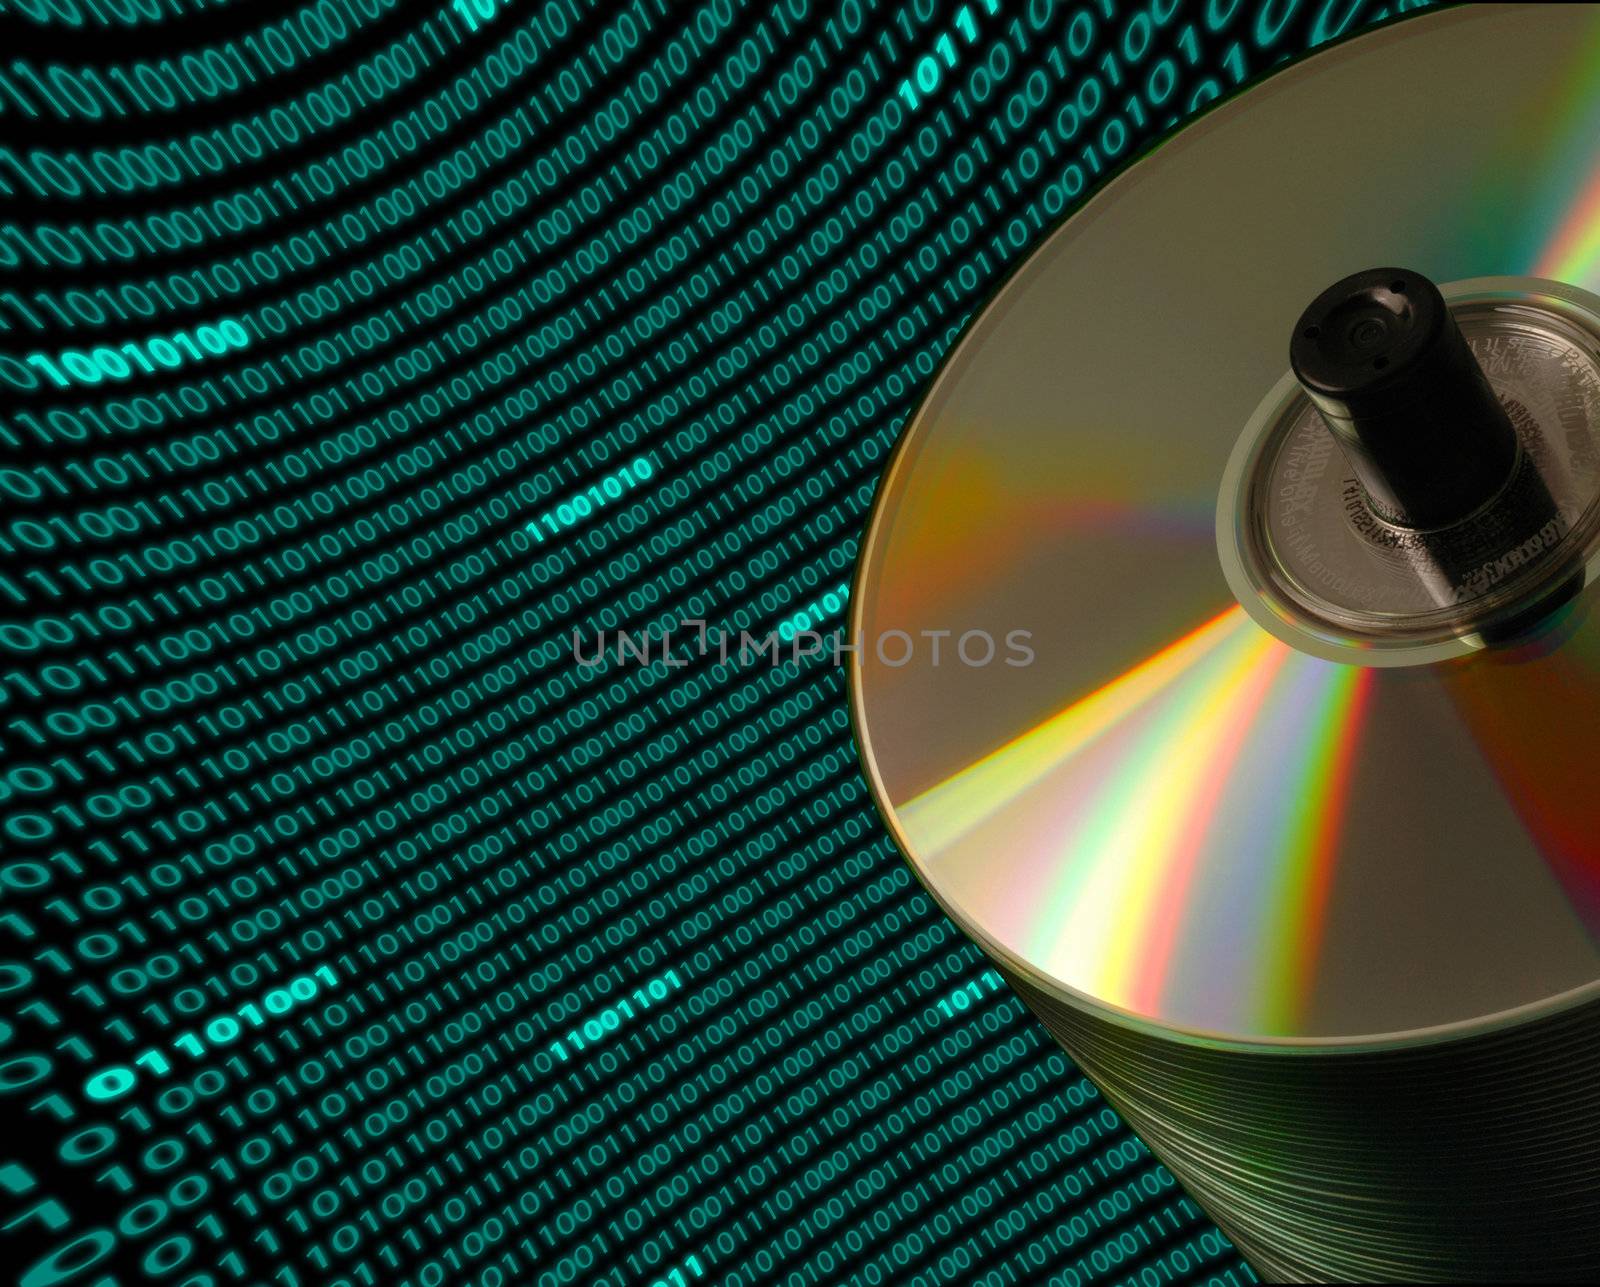 Close-up of a stack of CD/DVD disks on an angle, with a curved field of binary code in the background